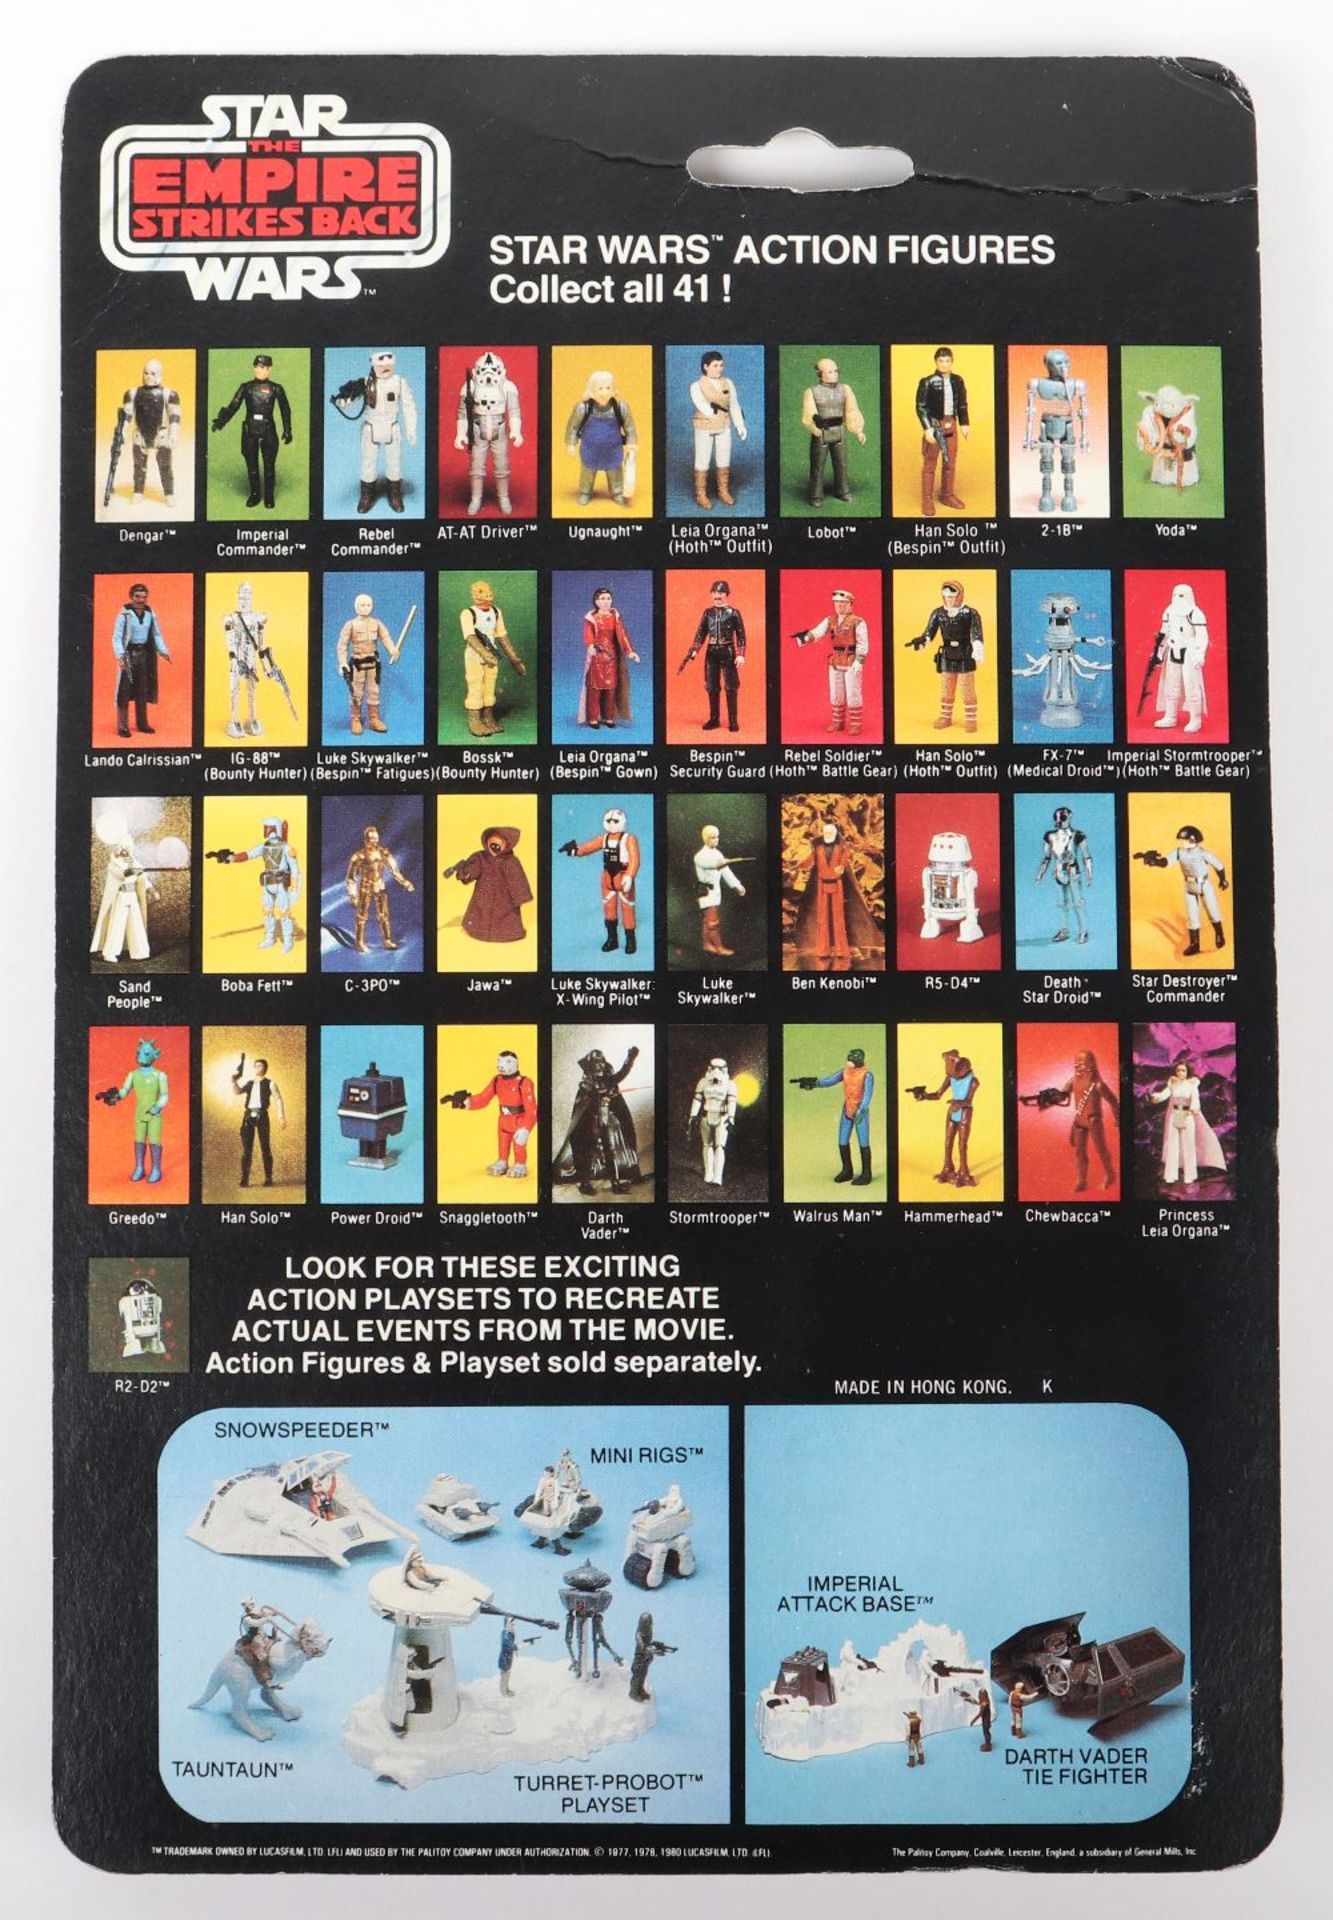 Palitoy Star Wars The Empire Strikes Back Ugnaught Vintage Original Carded Figure - Image 2 of 6